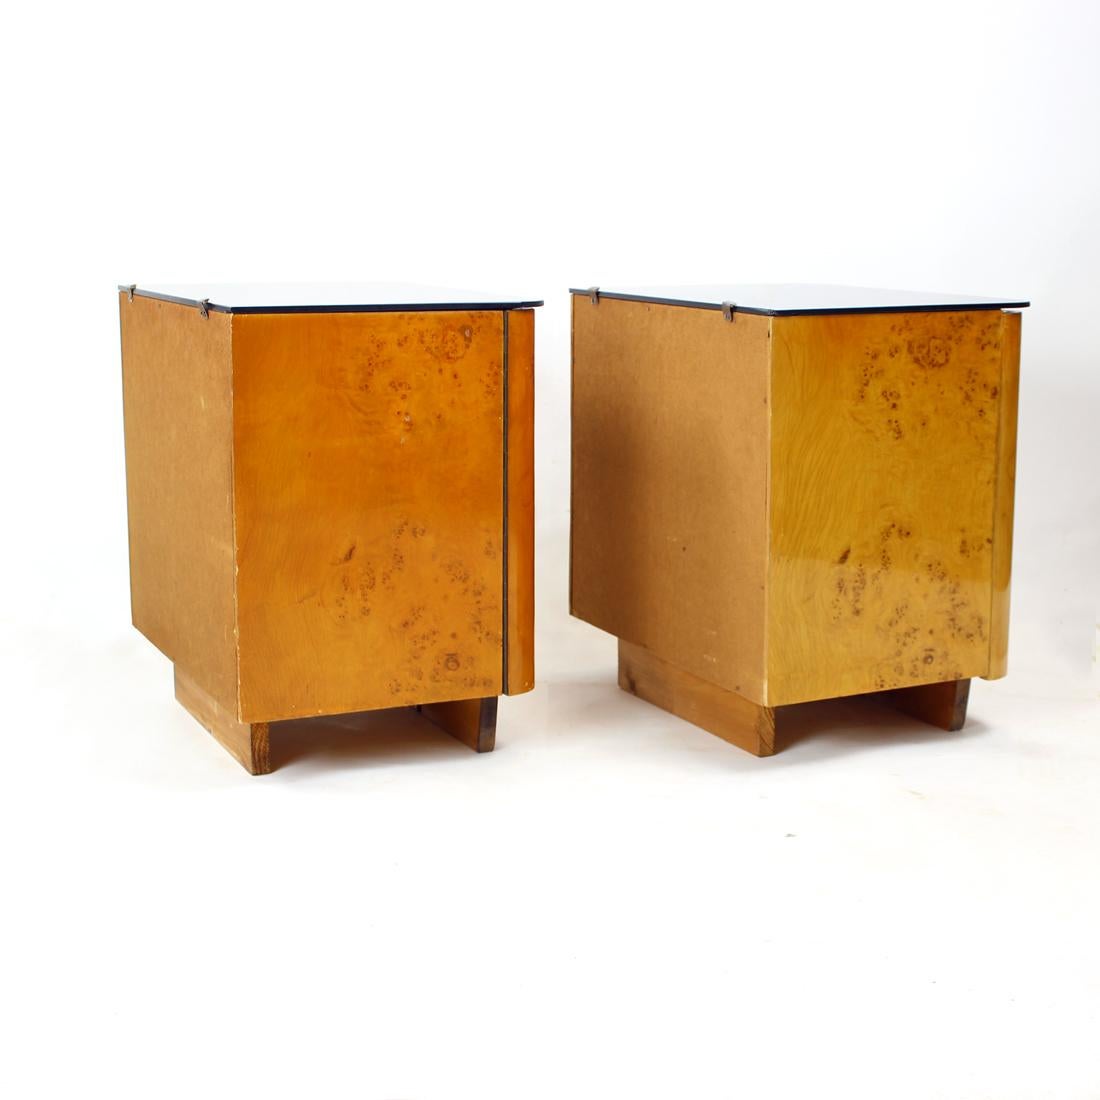 Set of Two Bedside Tables in Wood & Glass, Czechoslovakia, 1940s For Sale 6